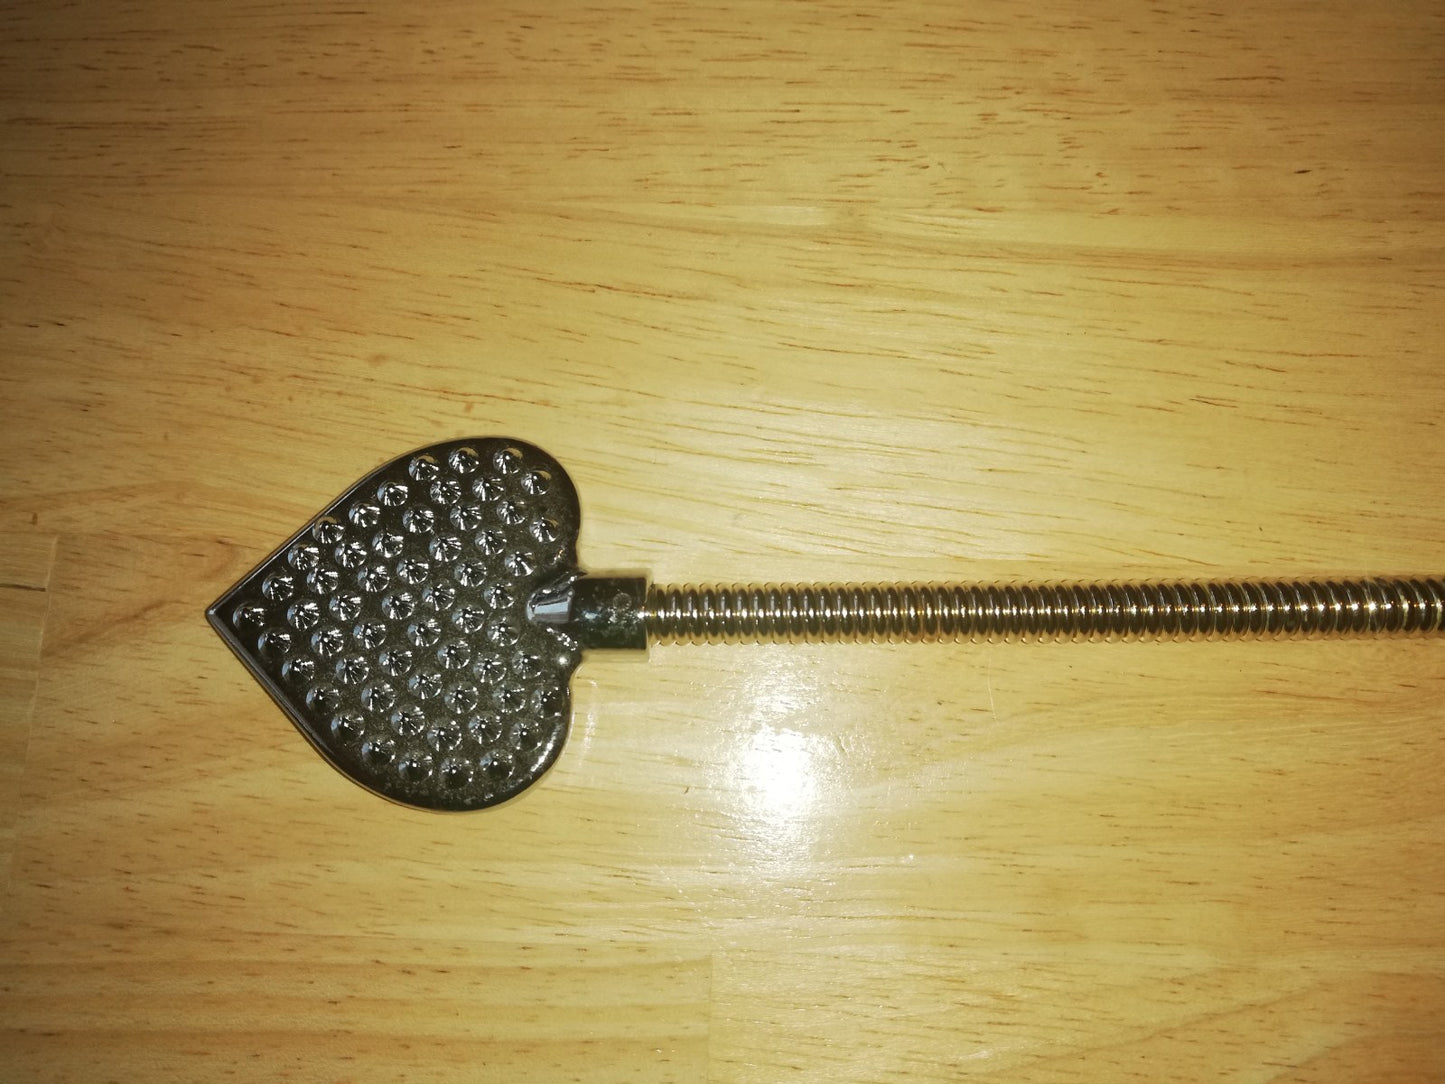 Metal paddle with spring